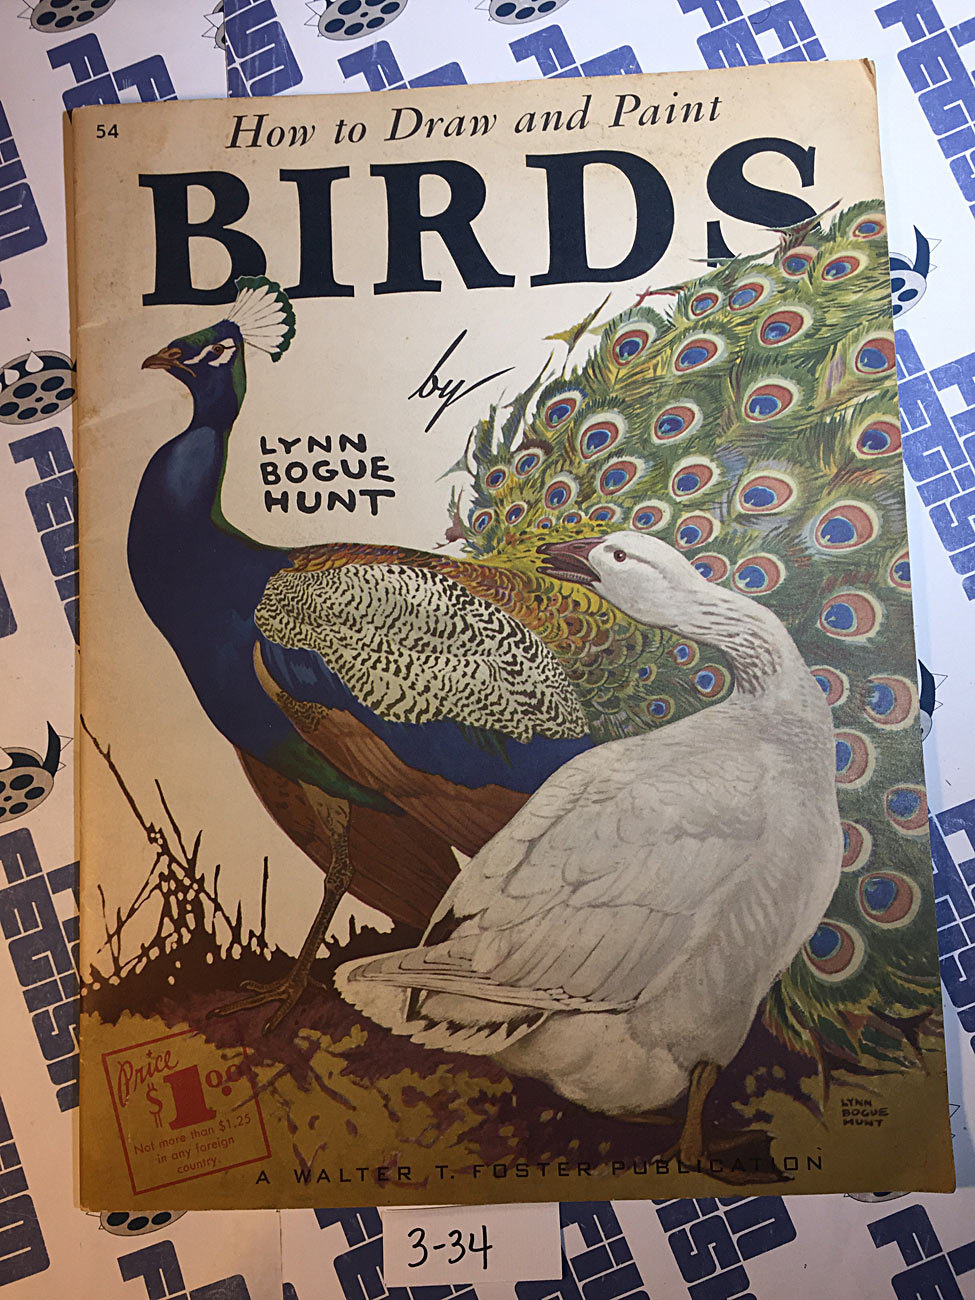 How to Draw and Paint Birds by Lynn Bogue Hunt Art Instruction Guide [334]